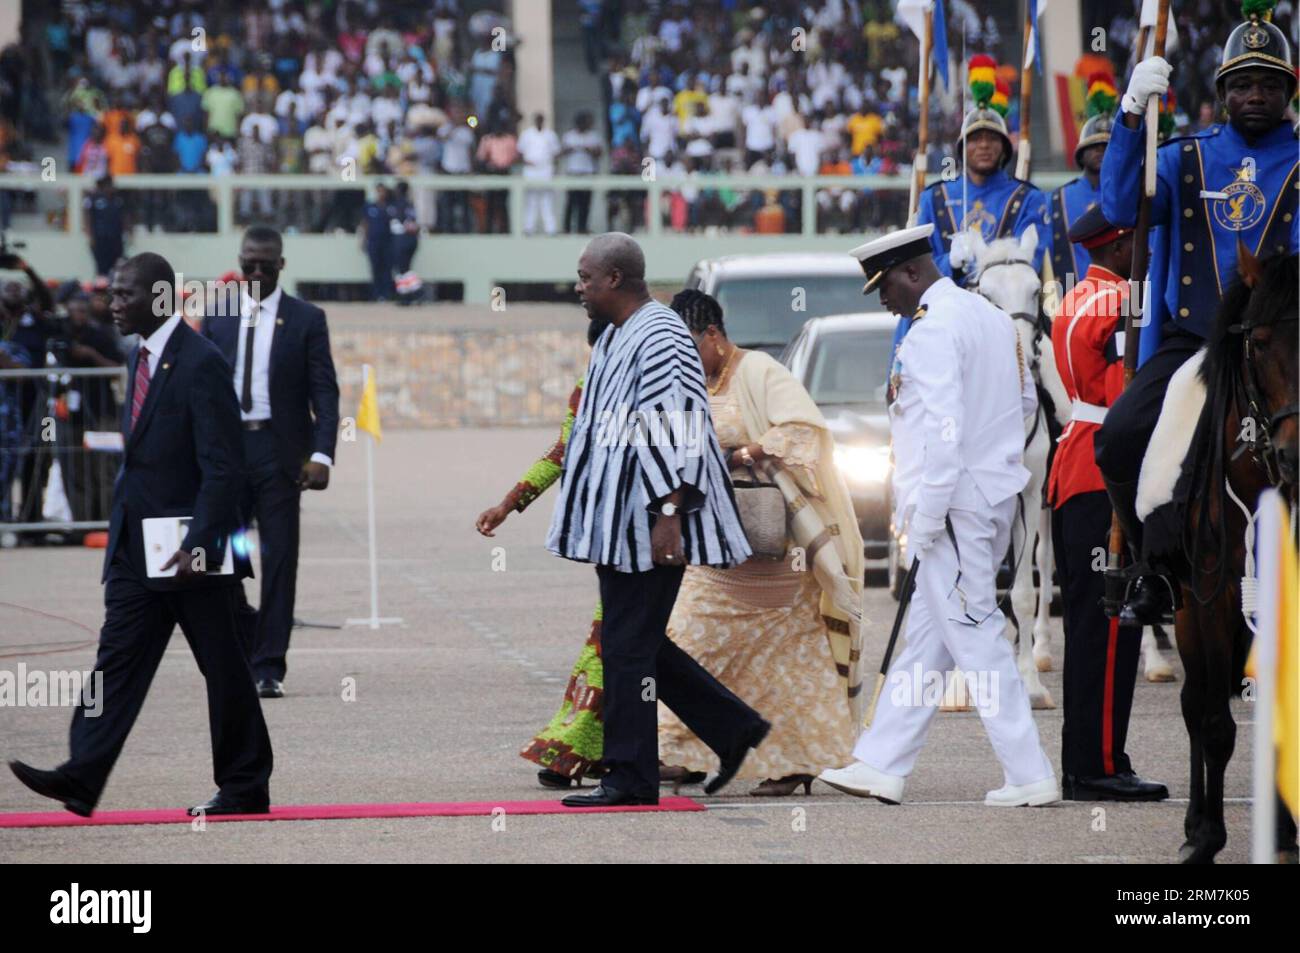 (140306) -- ACCRA, Mar. 6, 2014 (Xinhua) -- President of Ghana, John Dramani Mahama (C), attends the ceremony of parade at the Independence Square in Accra, Ghana, on March 6, 2014. Heavy rains that lasted over an hour interrupted the 57th Independence Day celebration of Ghana here on Thursday. (Xinhua/Lin Xiaowei) GHANA-INDEPENDENCE DAY-HEAVY RAIN PUBLICATIONxNOTxINxCHN   Accra Mar 6 2014 XINHUA President of Ghana John Dramani Mahama C Attends The Ceremony of Parade AT The Independence Square in Accra Ghana ON March 6 2014 Heavy Rains Thatcher lasted Over to hour interrupted The 57th Independ Stock Photo